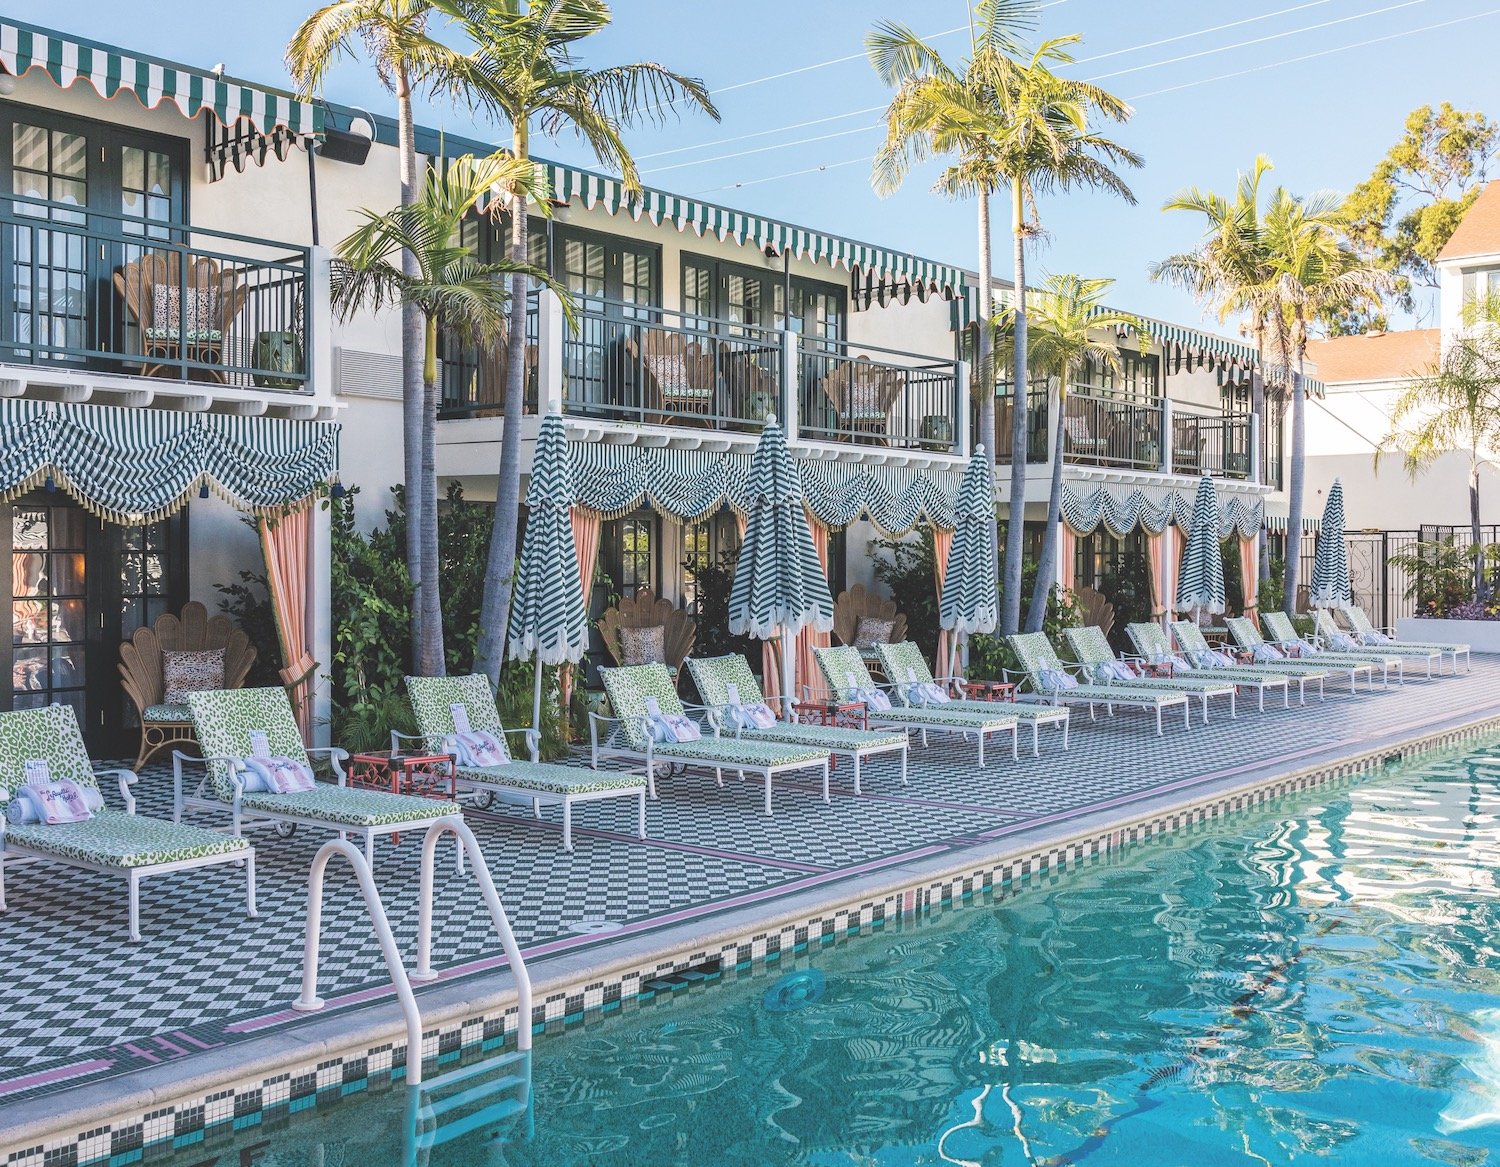 Consortium Holding's newly renovated Lafayette Hotel in North Park, San Diego featuring a pool, poolside cabanas, and lounge chairs